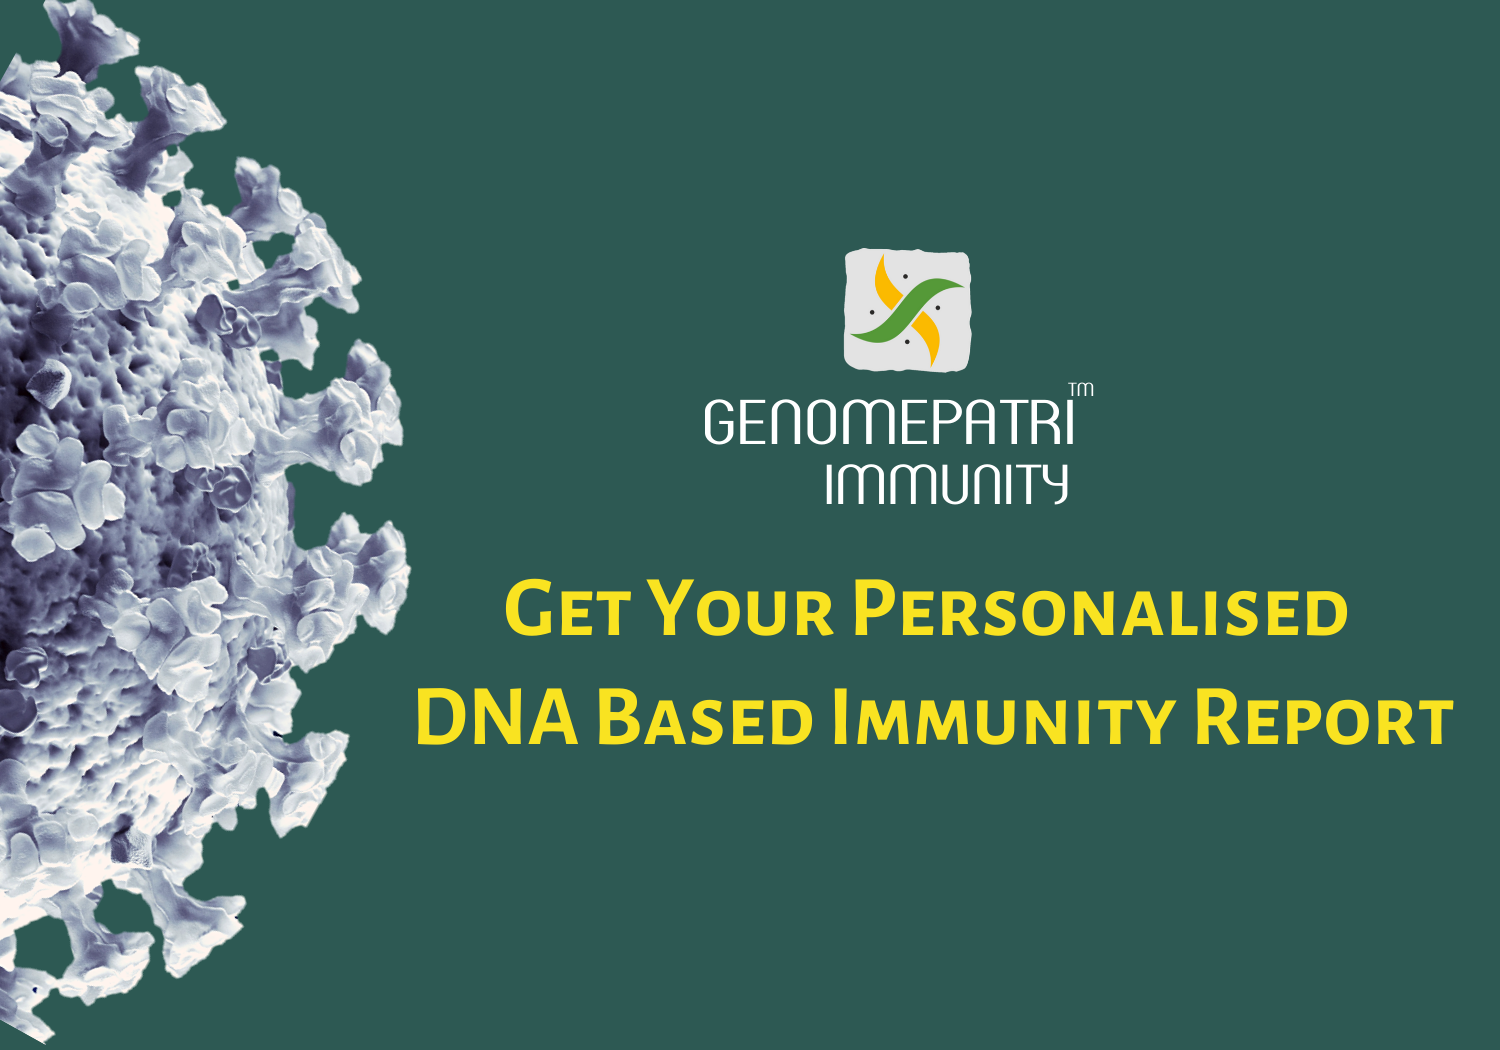 Press Release: Mapmygenome Launches Genomepatri™ Immunity with a Panel Focussed on COVID-19